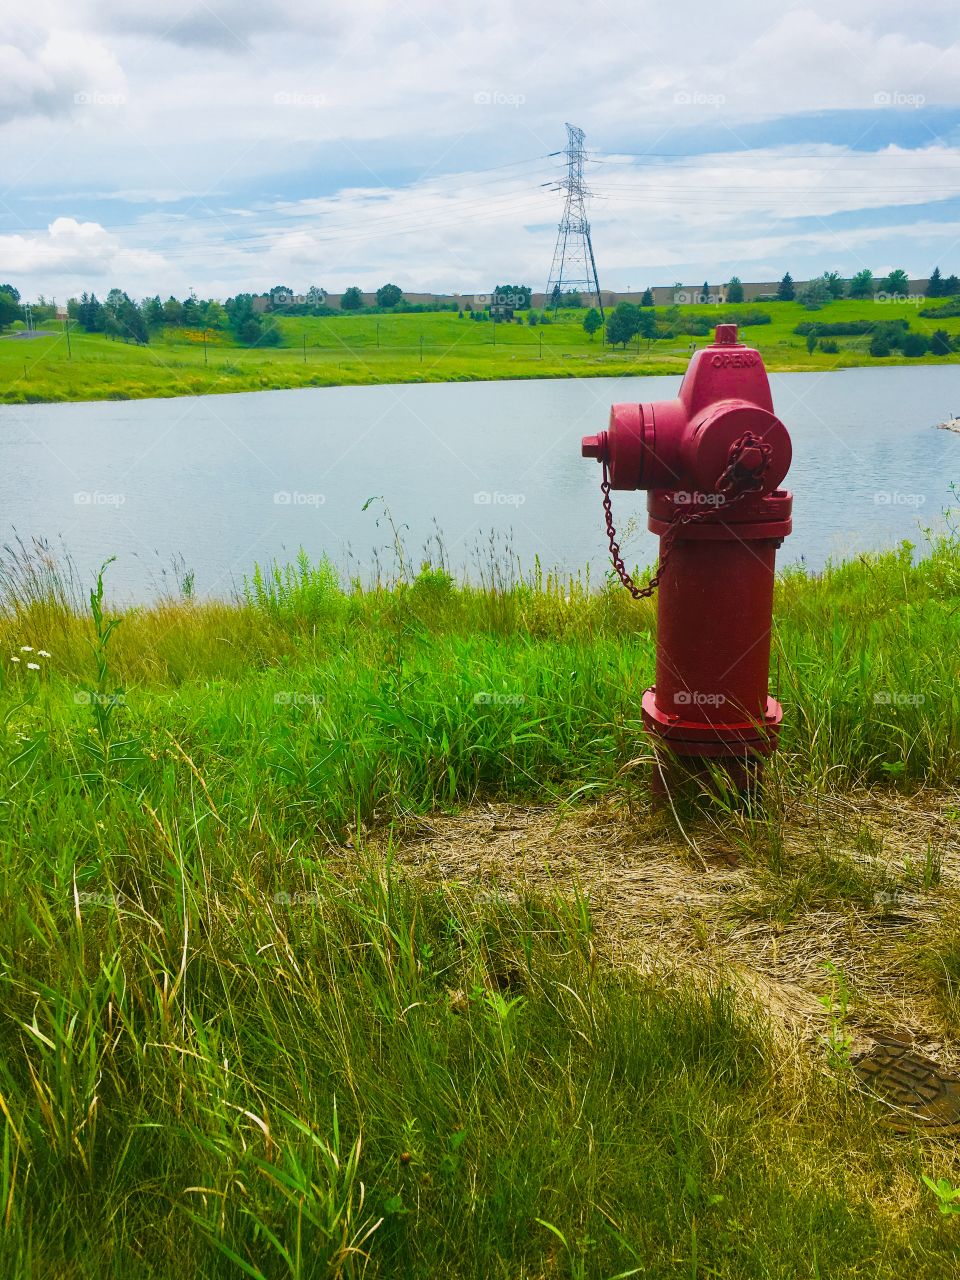 Bright red fire hydrant against green grass and blue pond